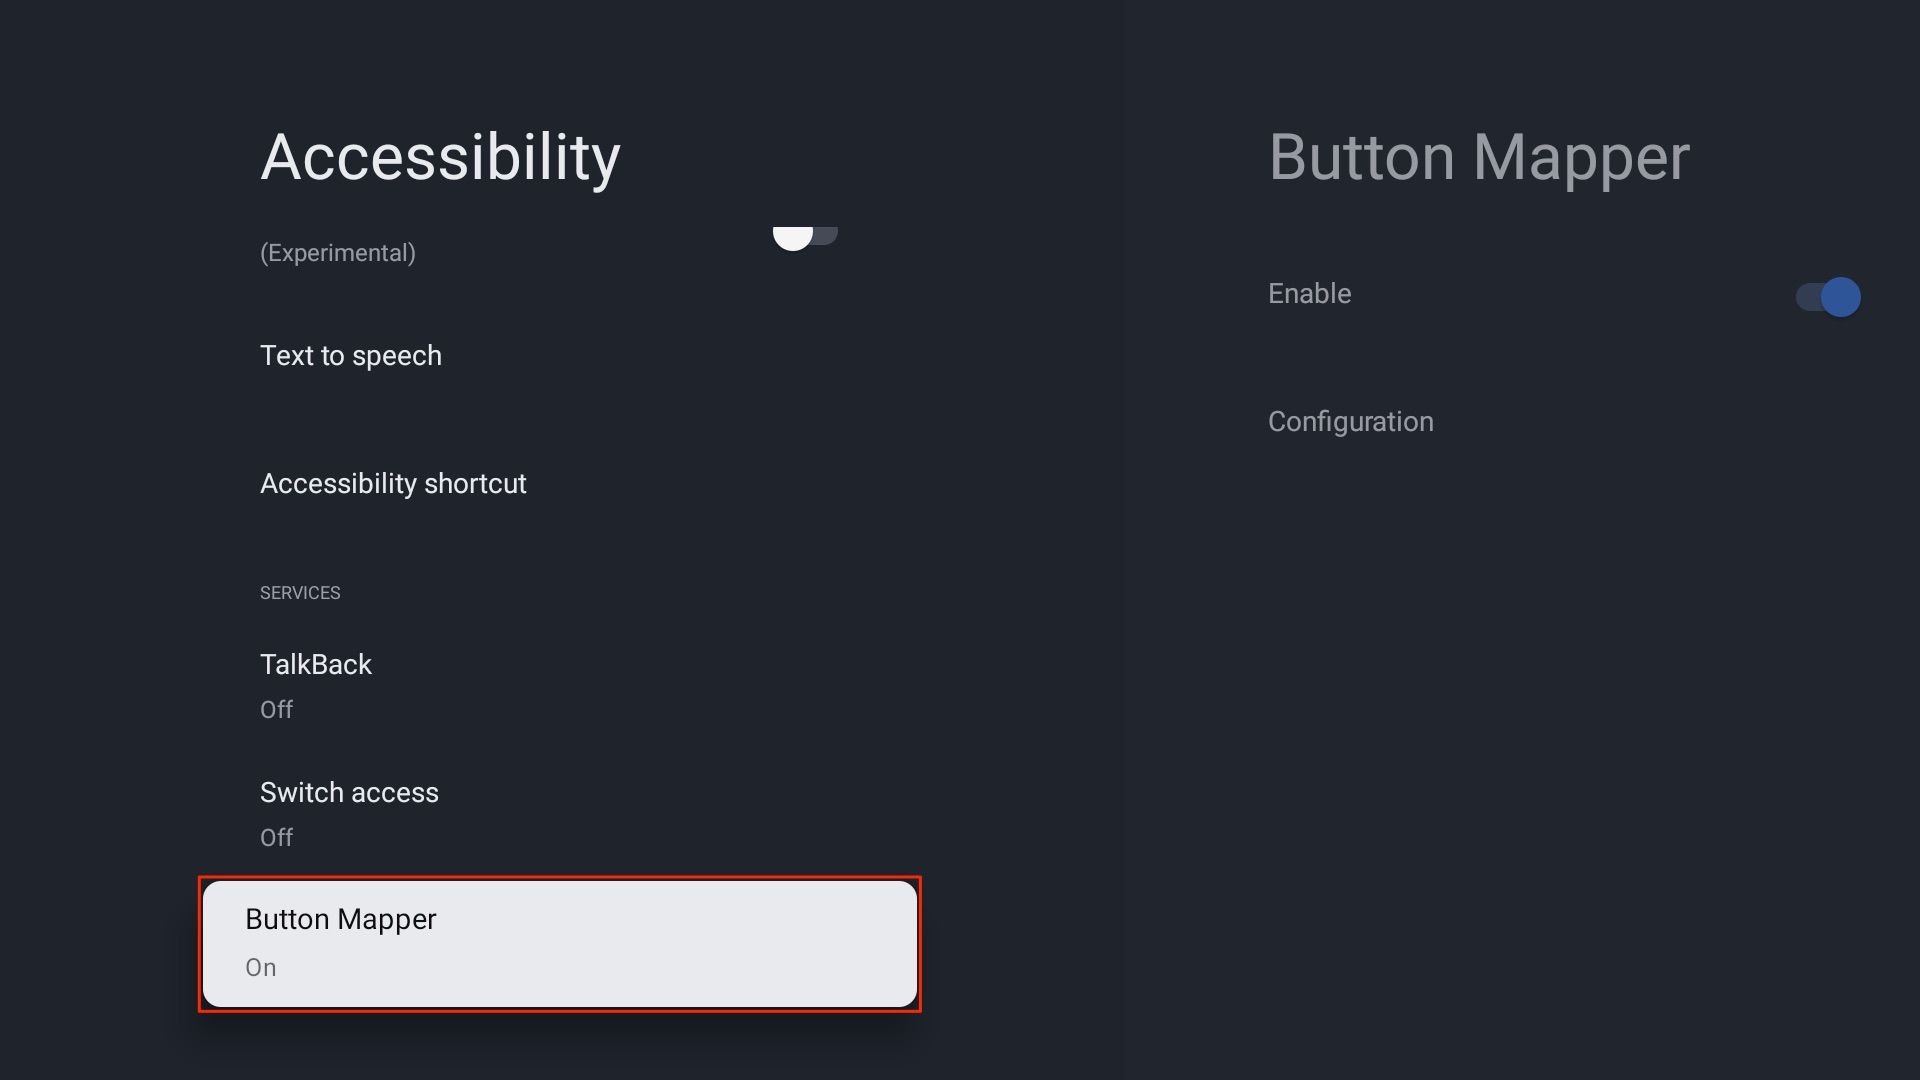 Button Mapper in Google TV accessibility settings